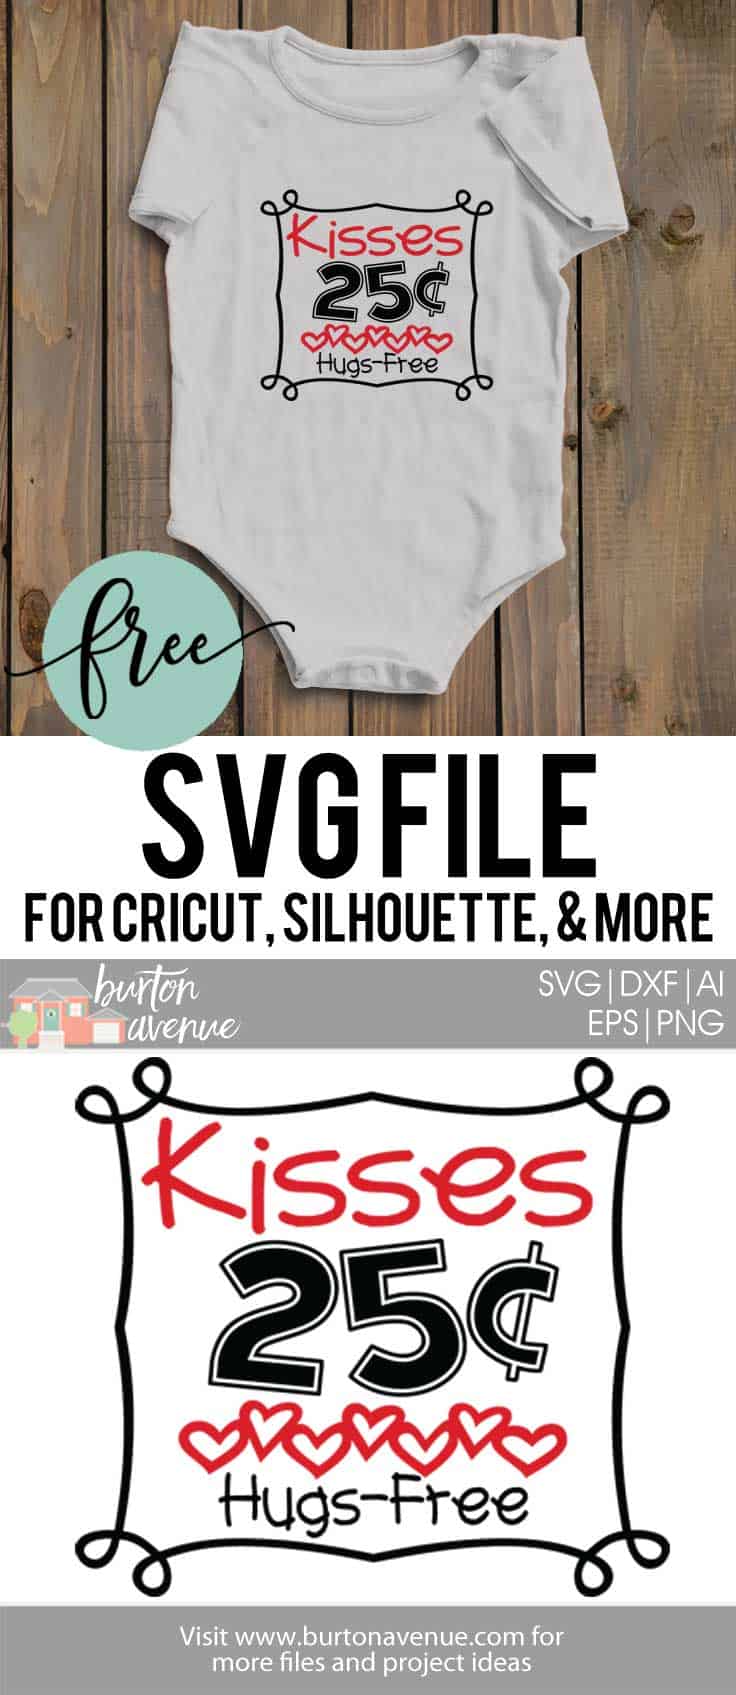 Make a cute Valentine t-shirt for your little one with this free svg file! This free svg file works with silhouette and cricut cutters.